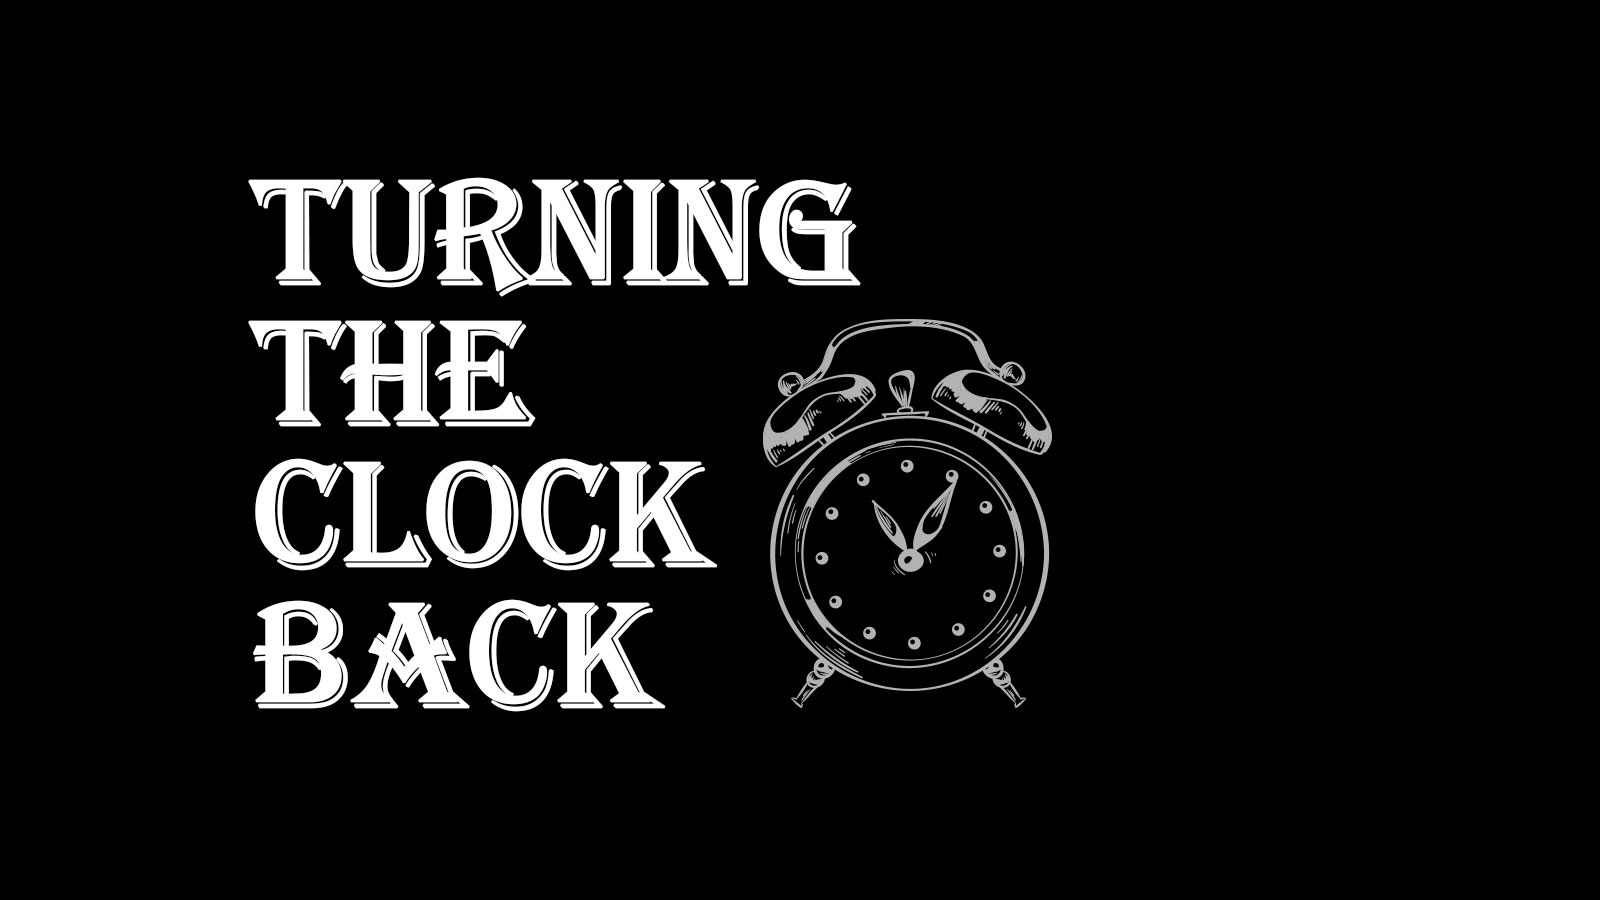 Turning the Clock Back - James Ritchie (Snr) - stone mason, goldminer ...